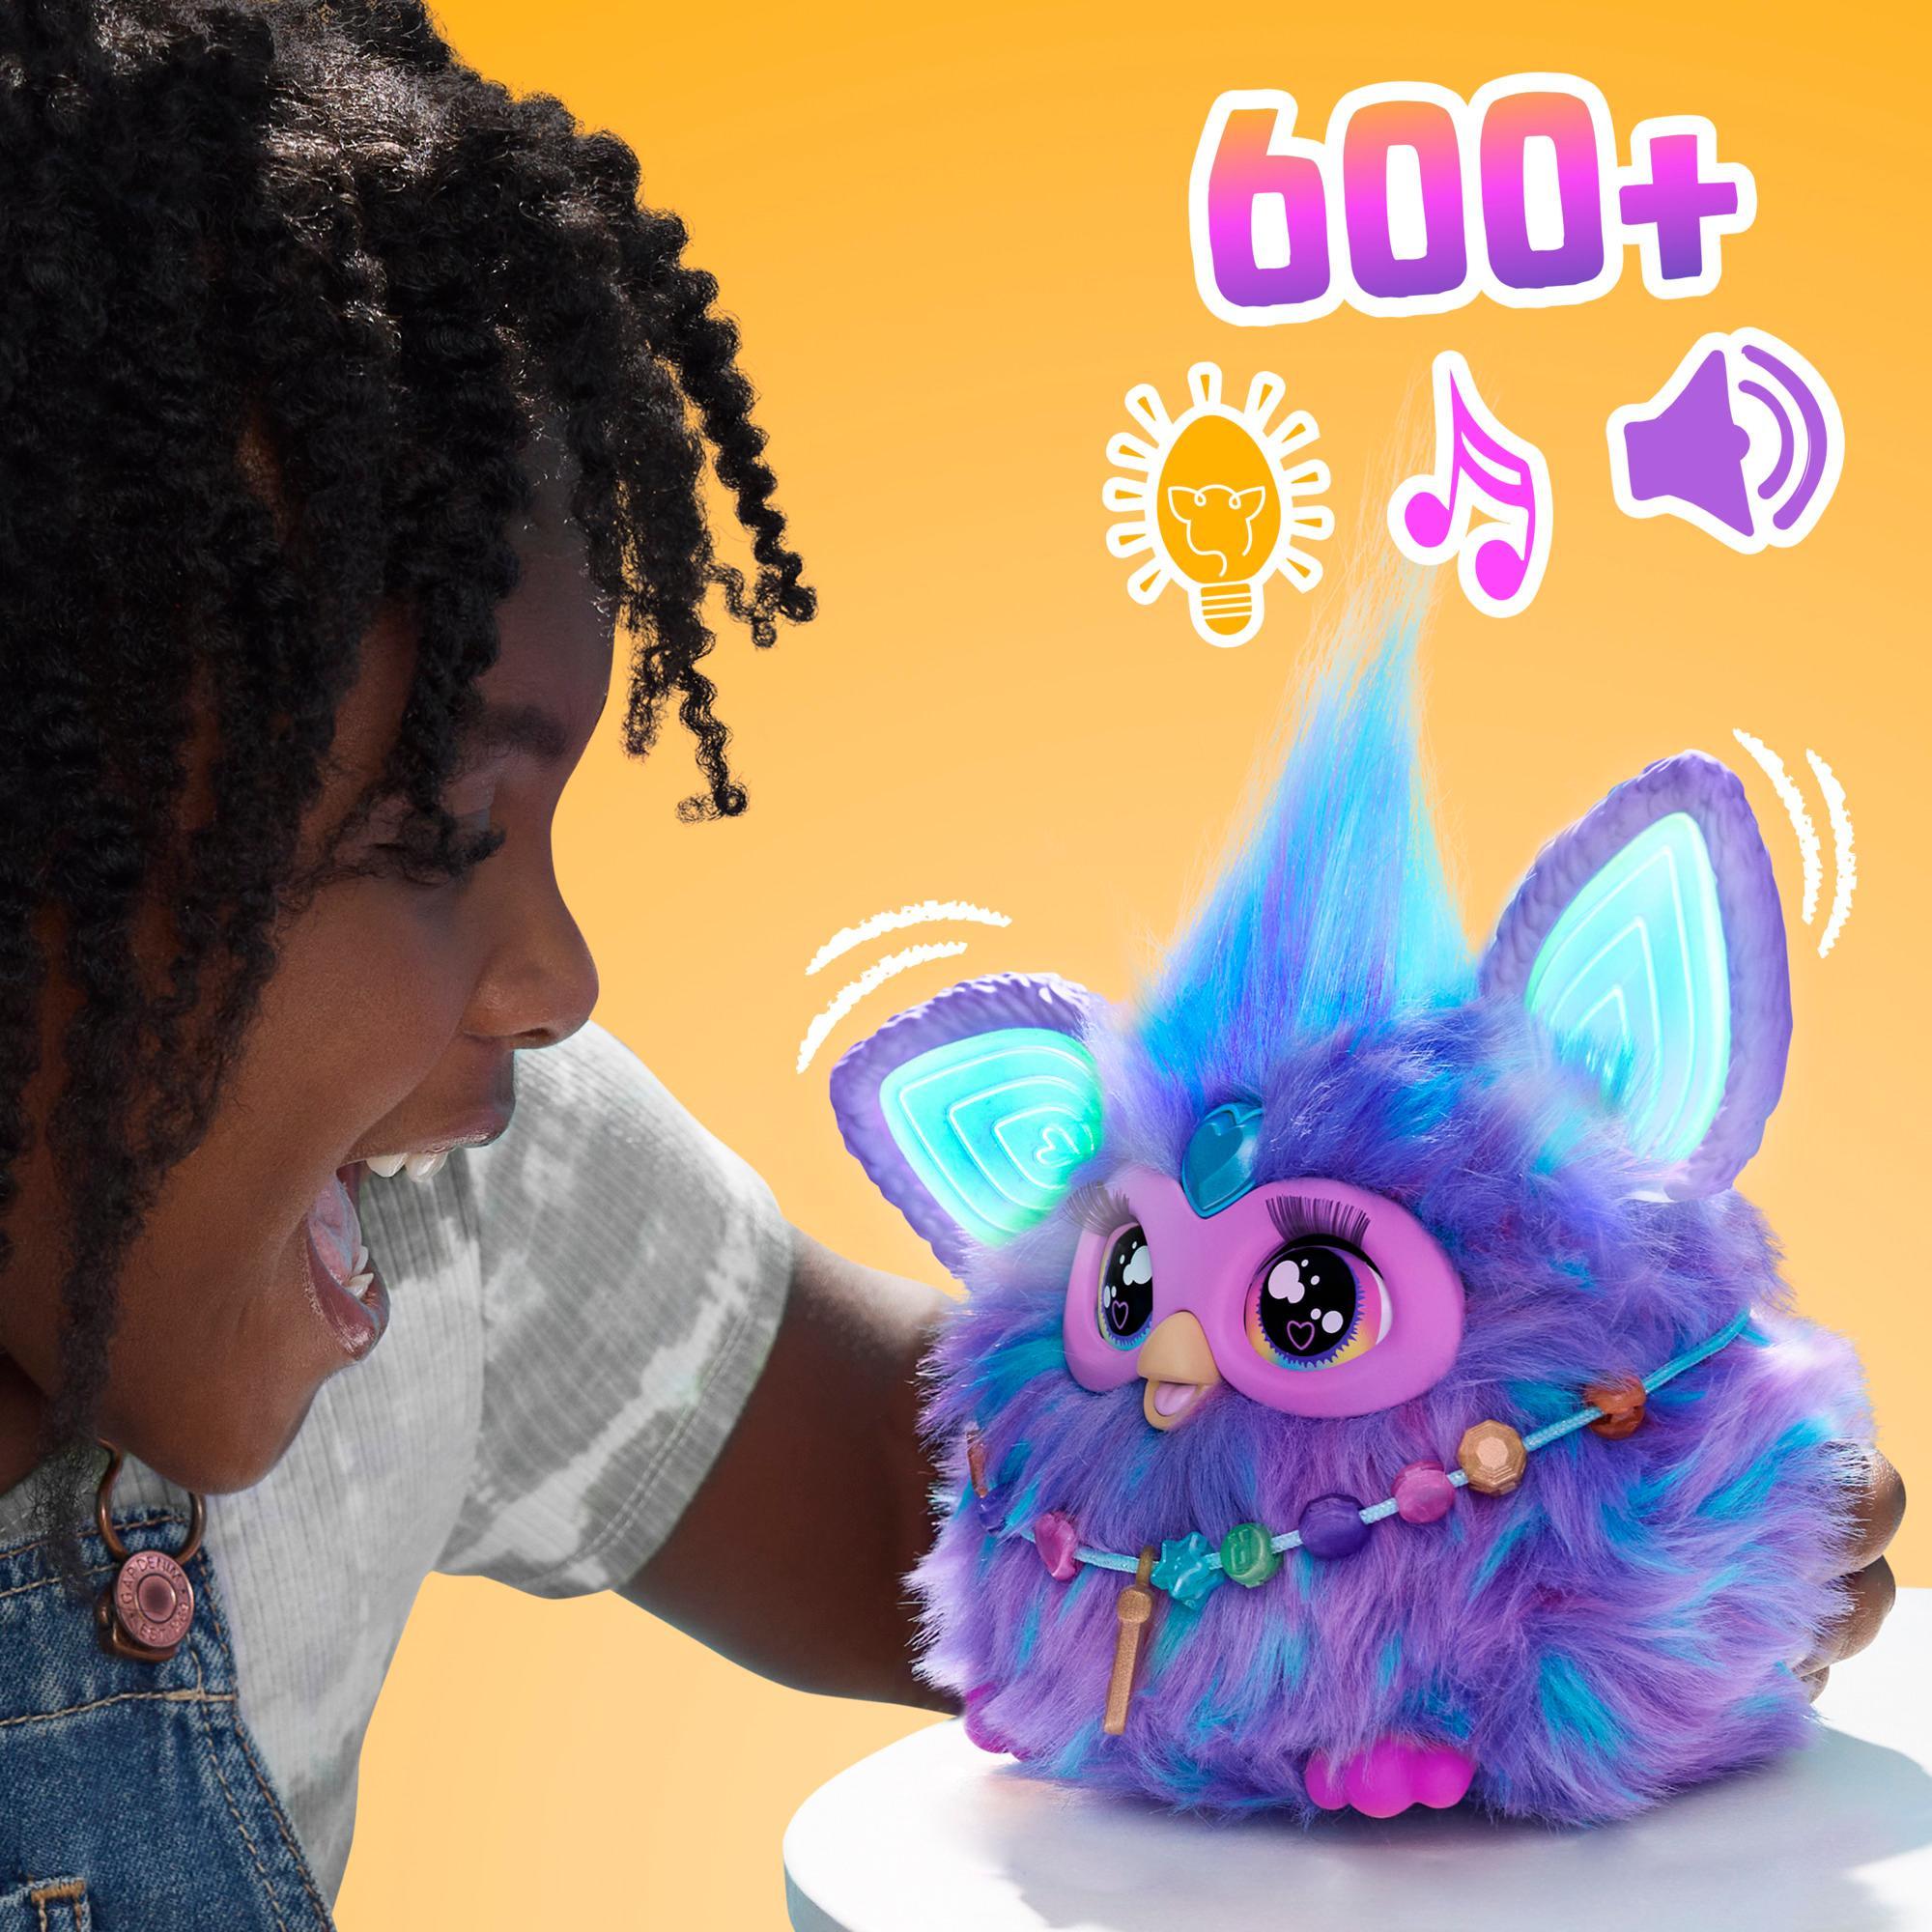 Furby Purple Plush Interactive Toys for 6 Year Old Girls & Boys & Up product thumbnail 1